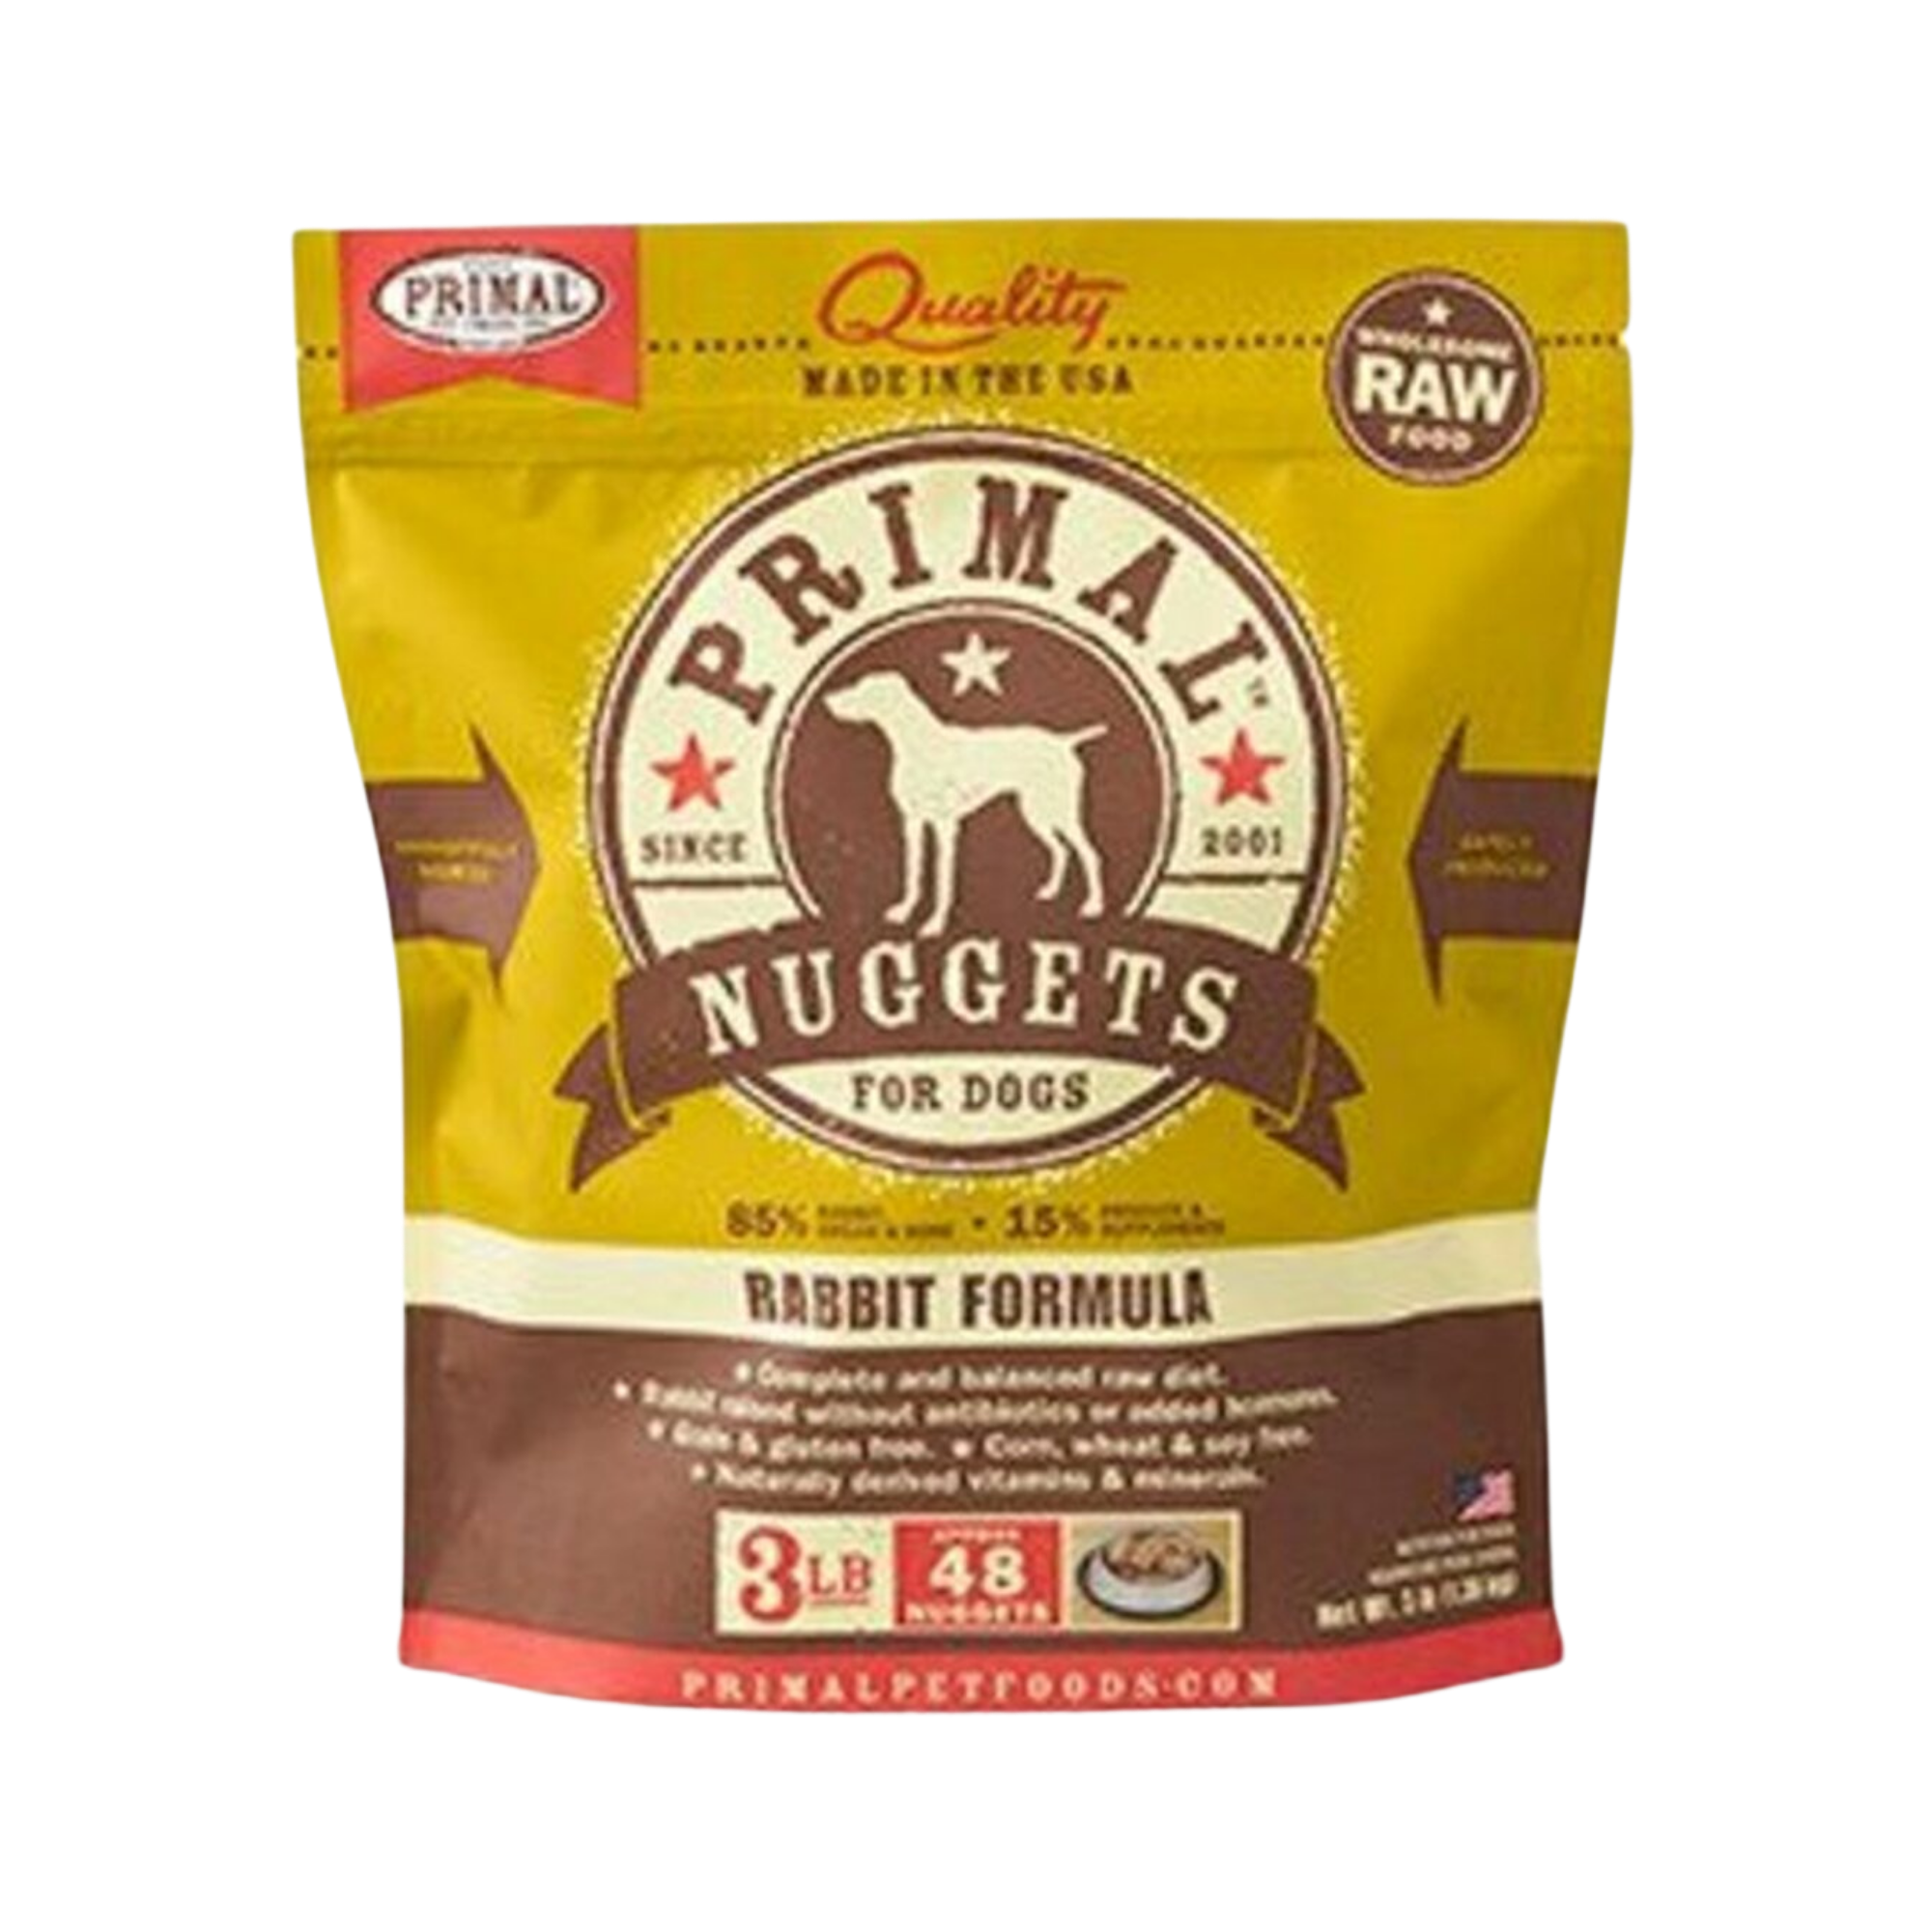 Primal Nuggets Rabbit Formula Frozen Raw Dog Food 3 lbs - Mutts & Co.